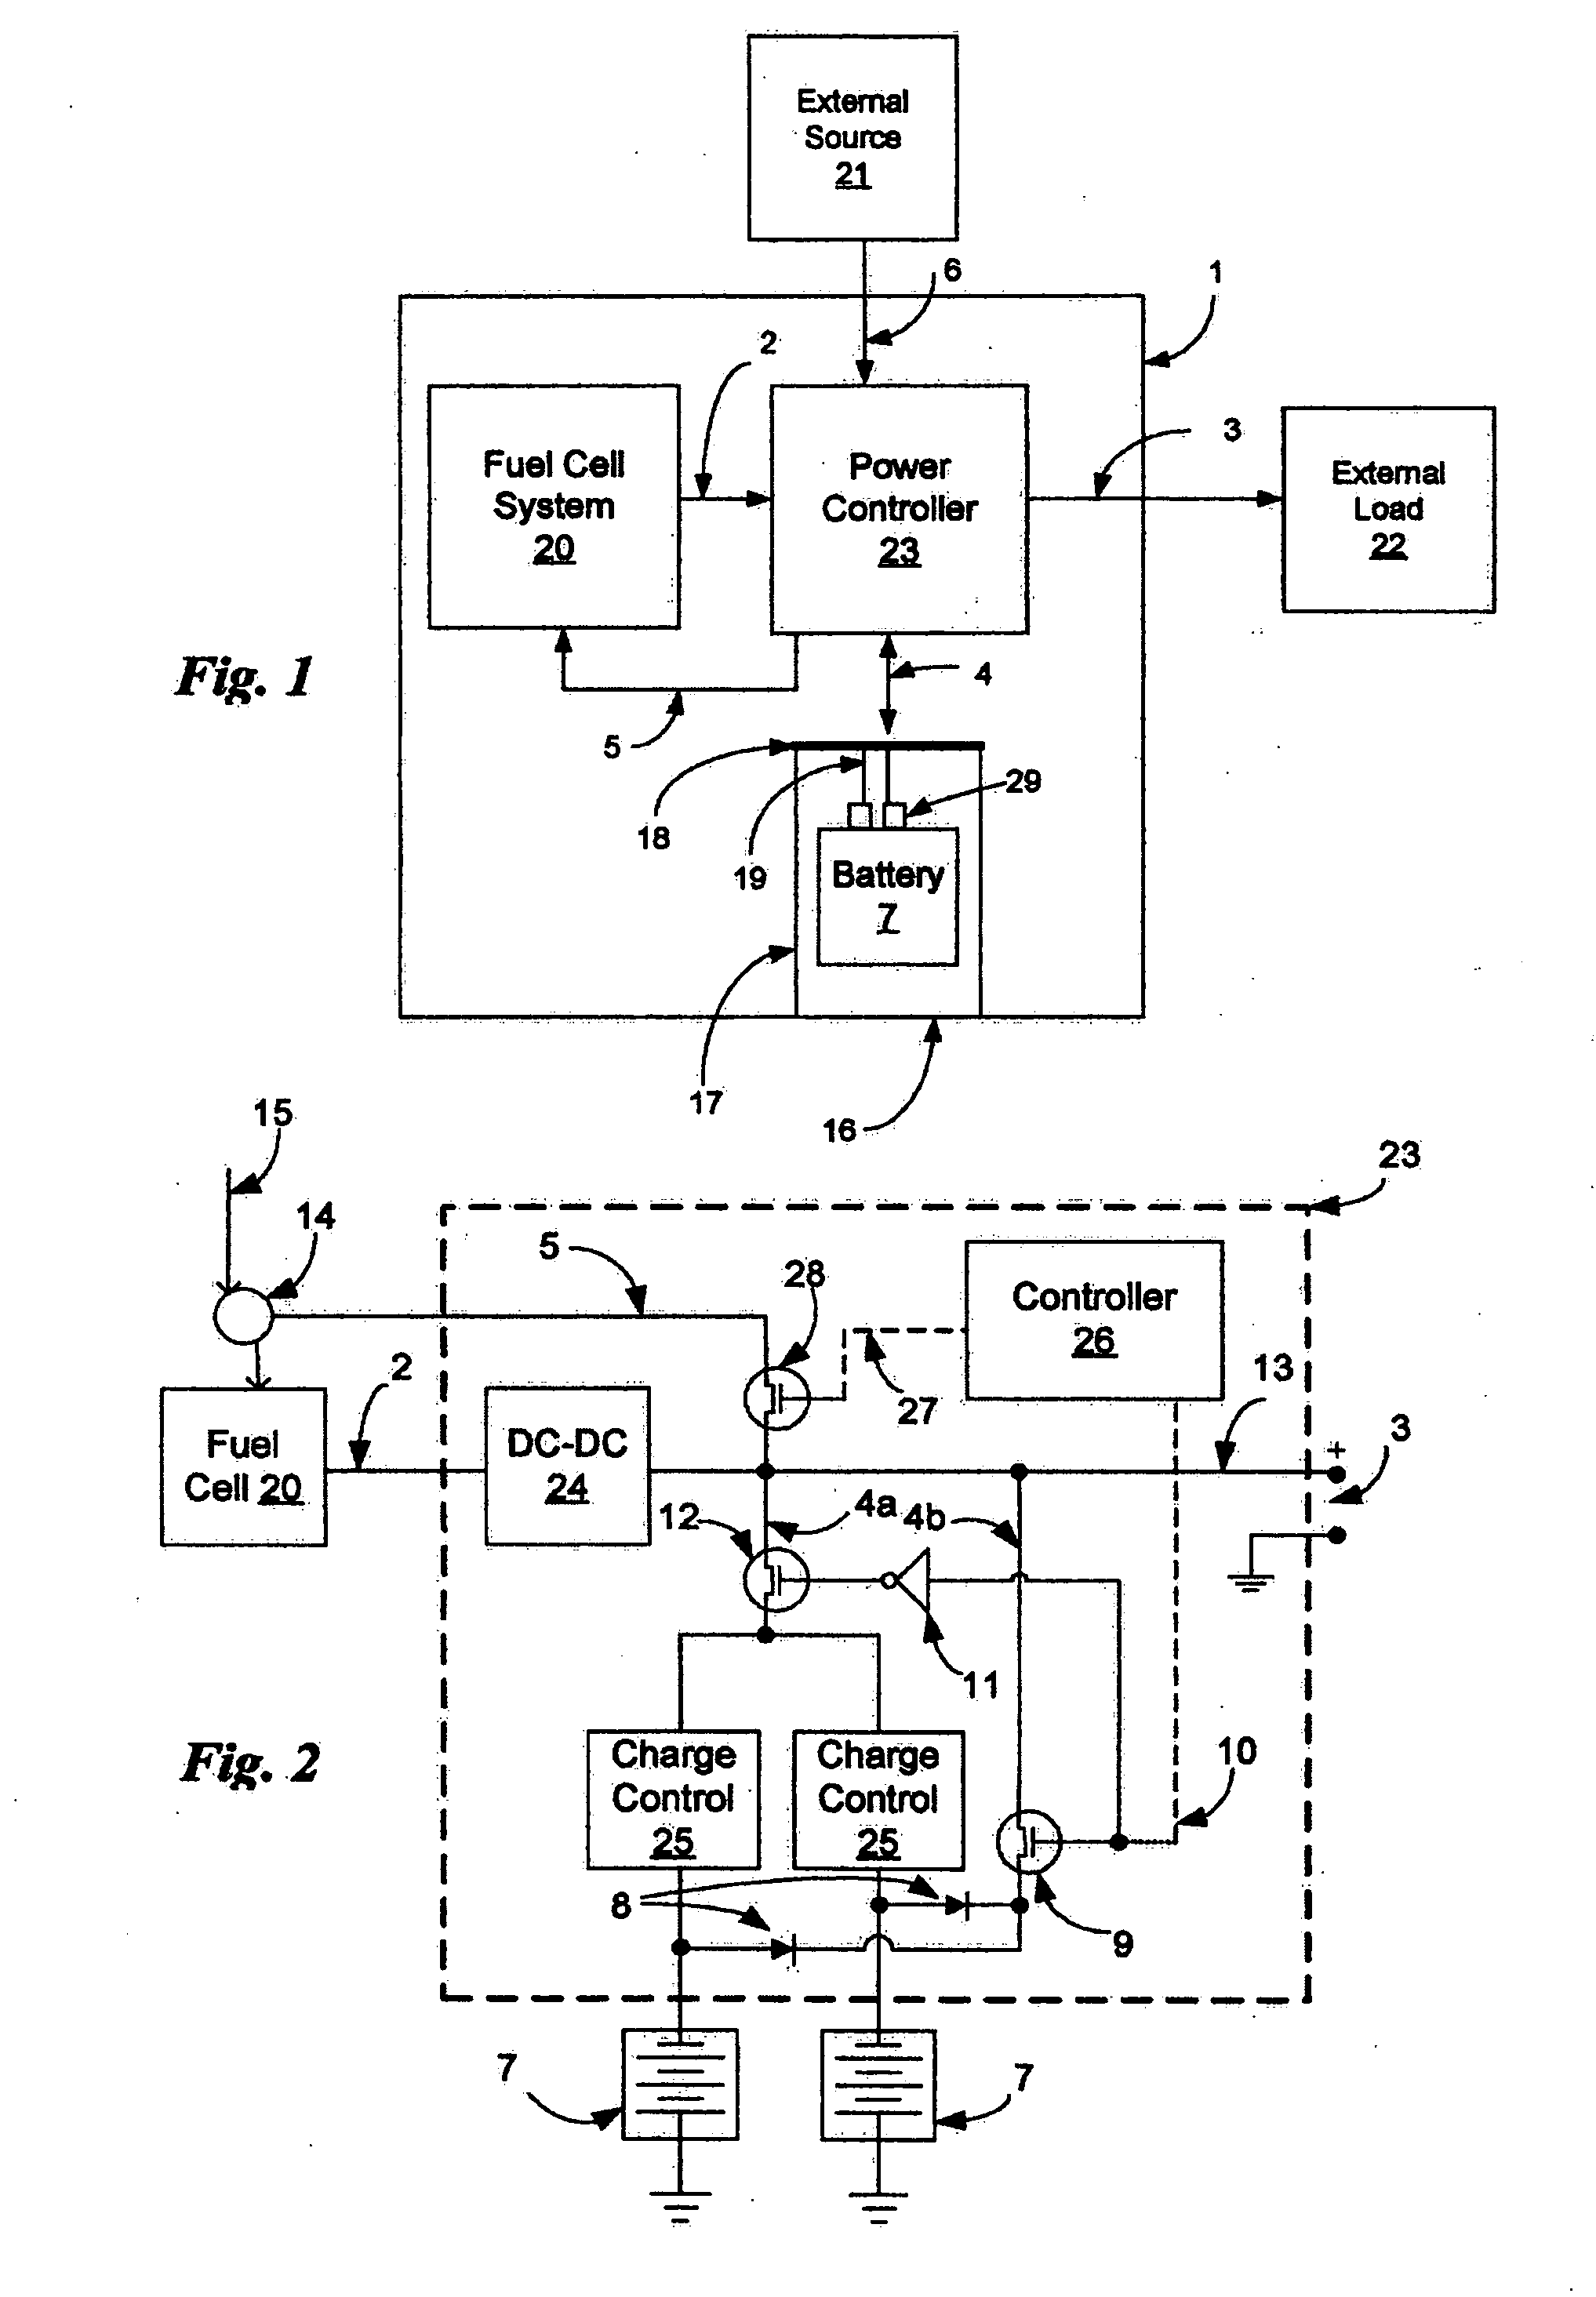 Fuel cell battery charging and power system